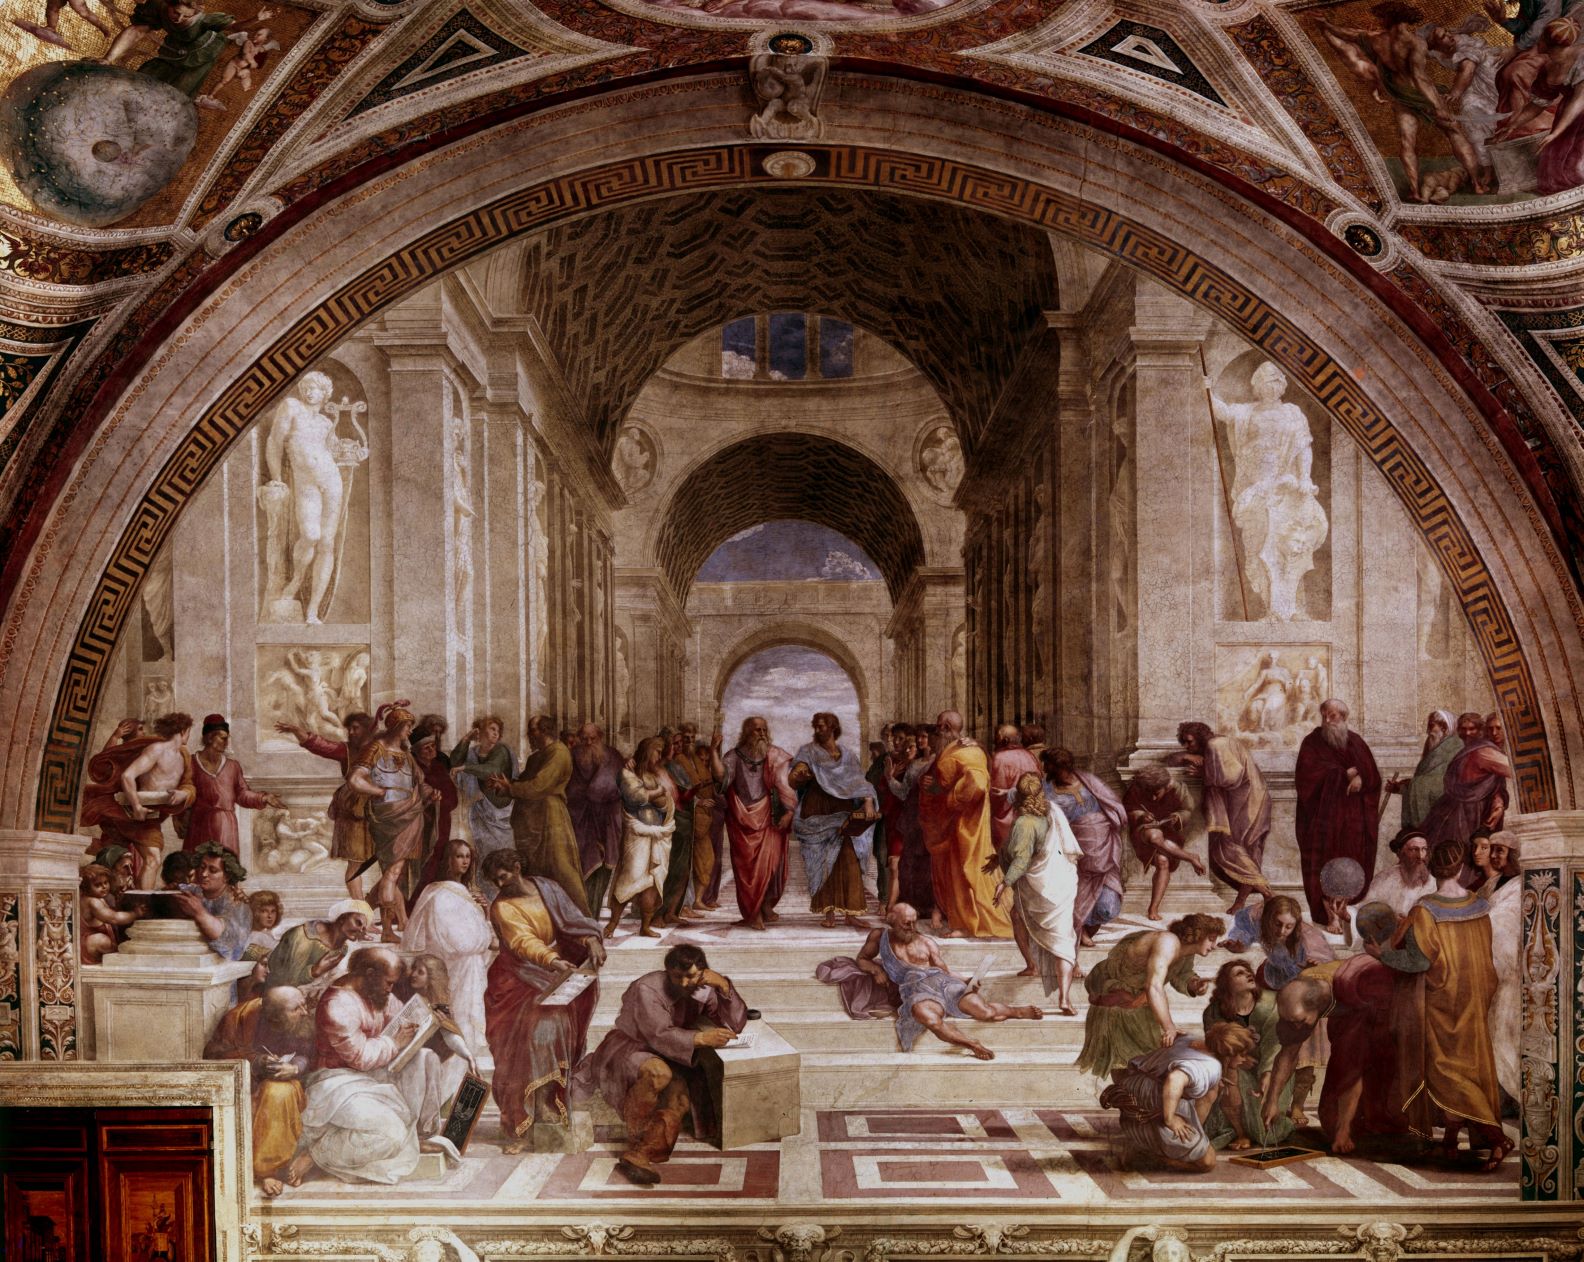 Raphael's painting The School of Athens